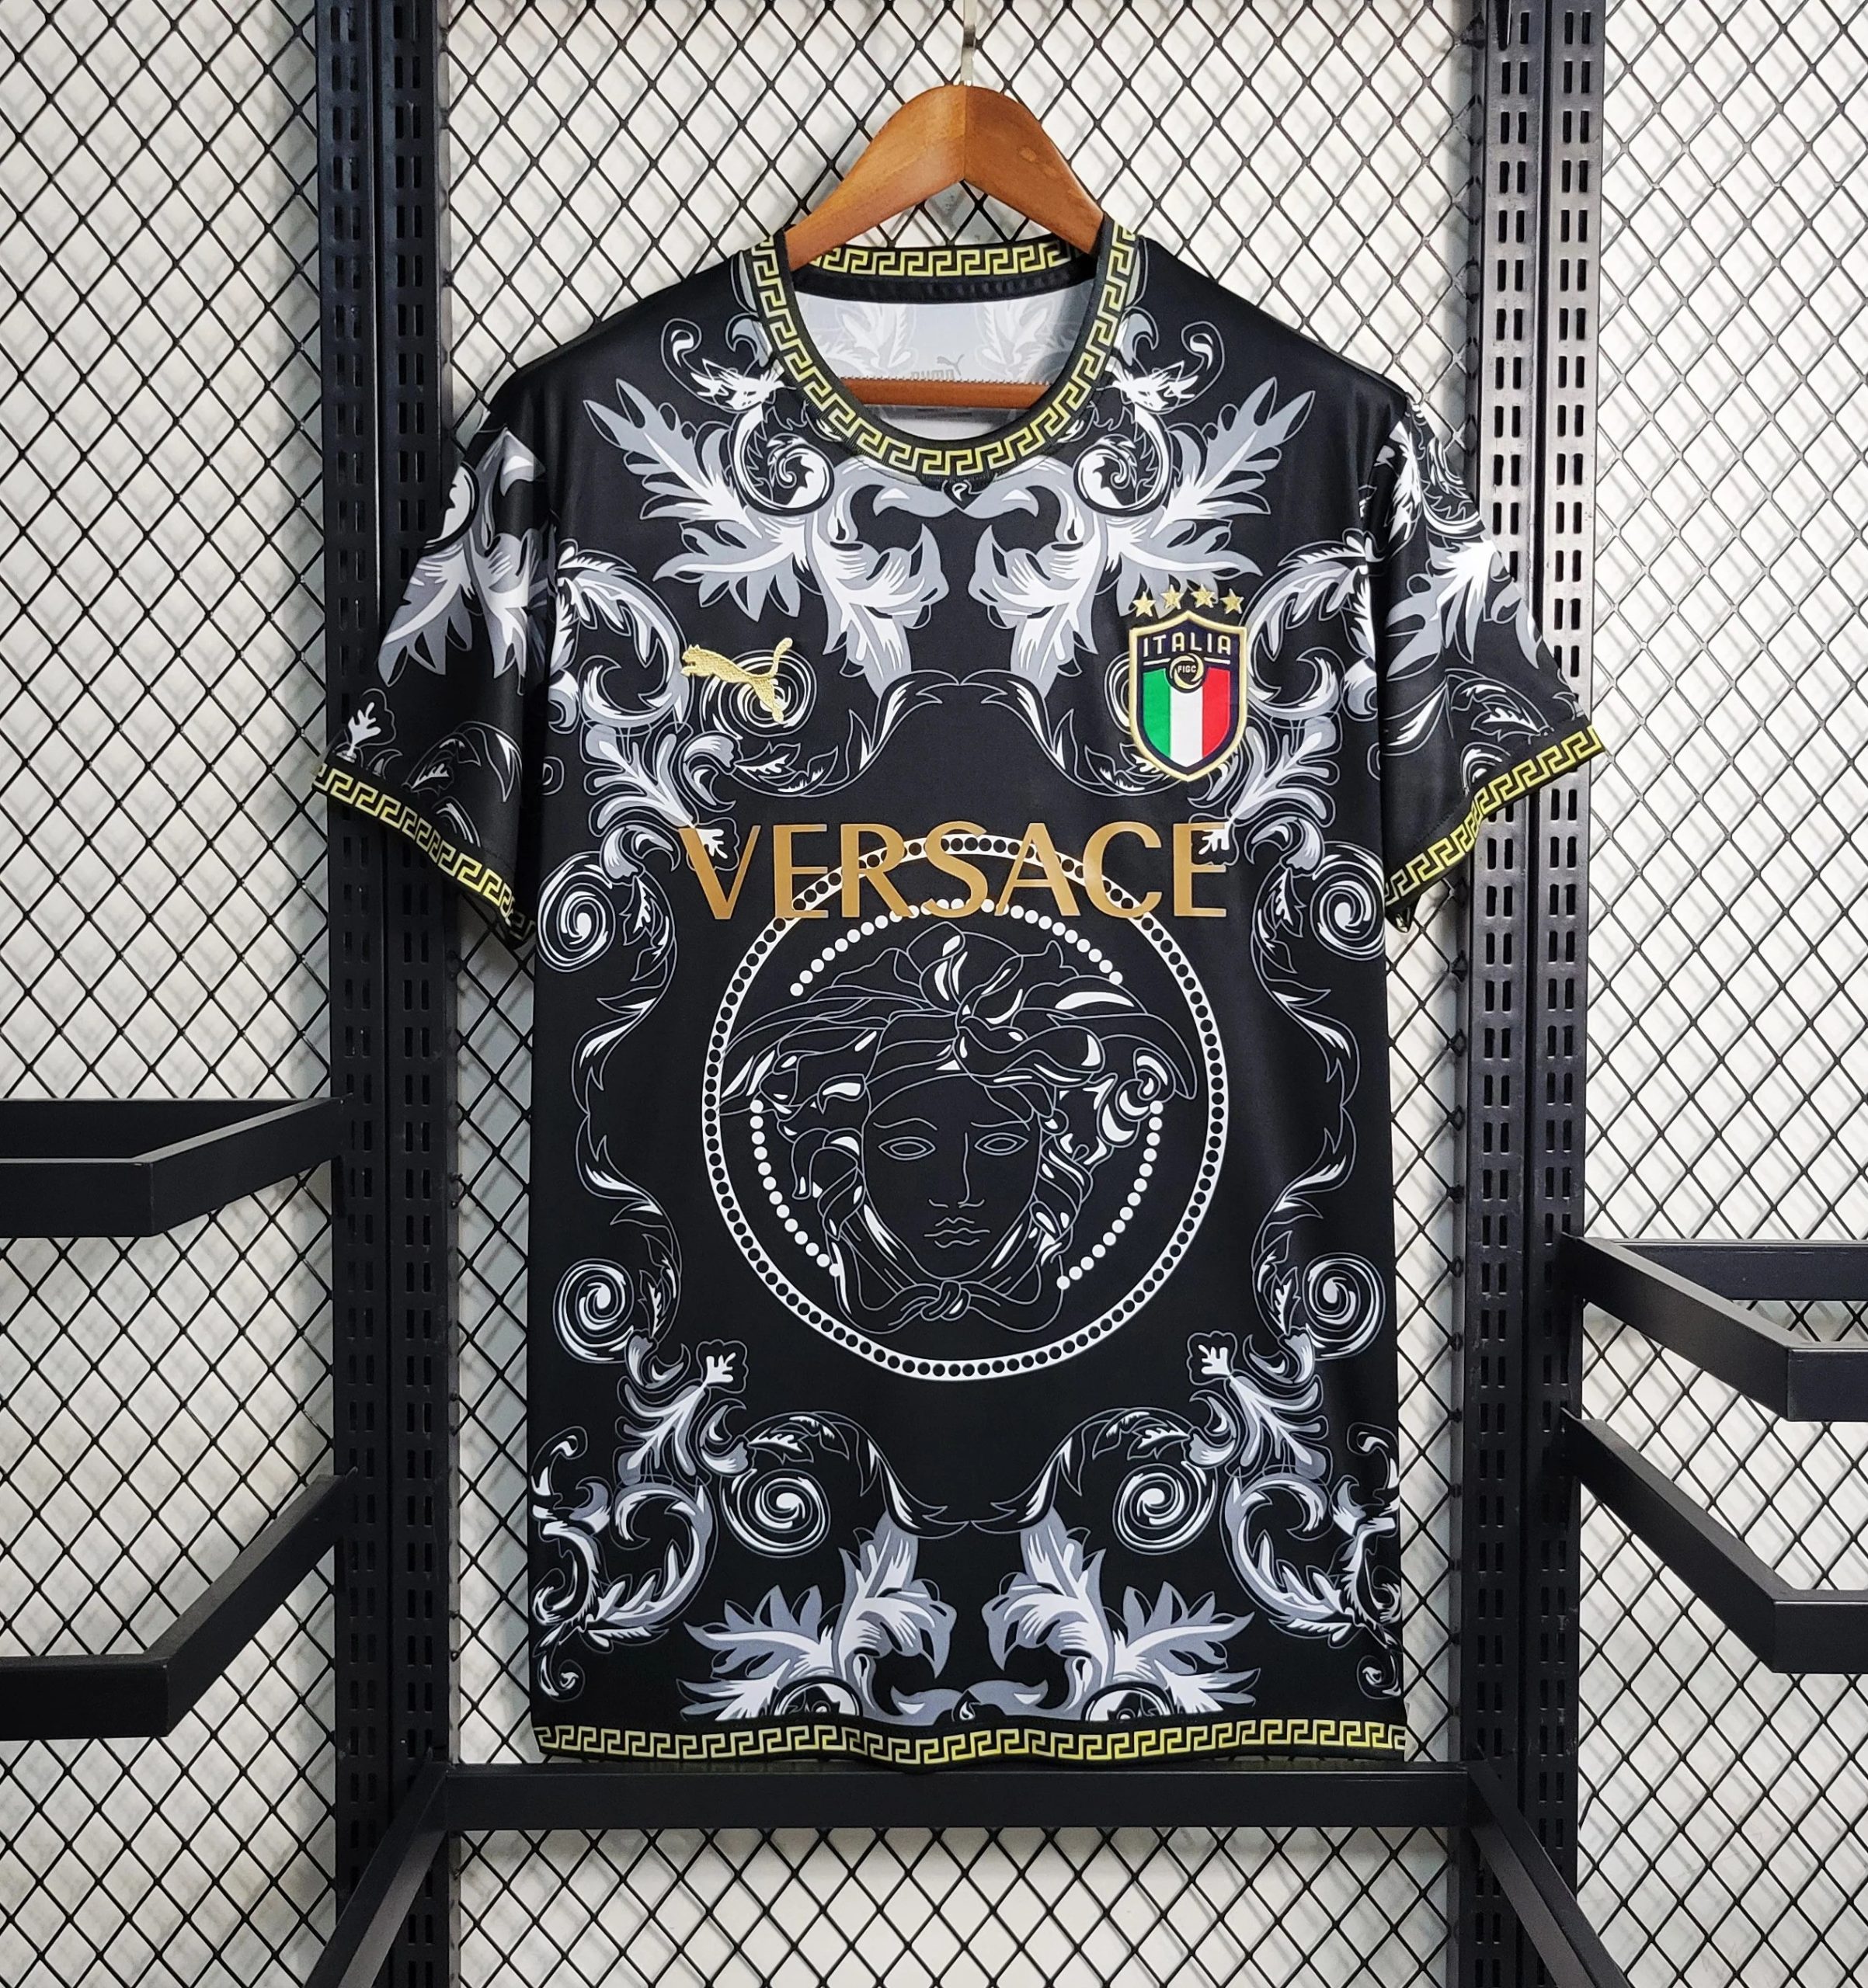 Buy fantastic italy x versace limited edition jersey from fanaacs